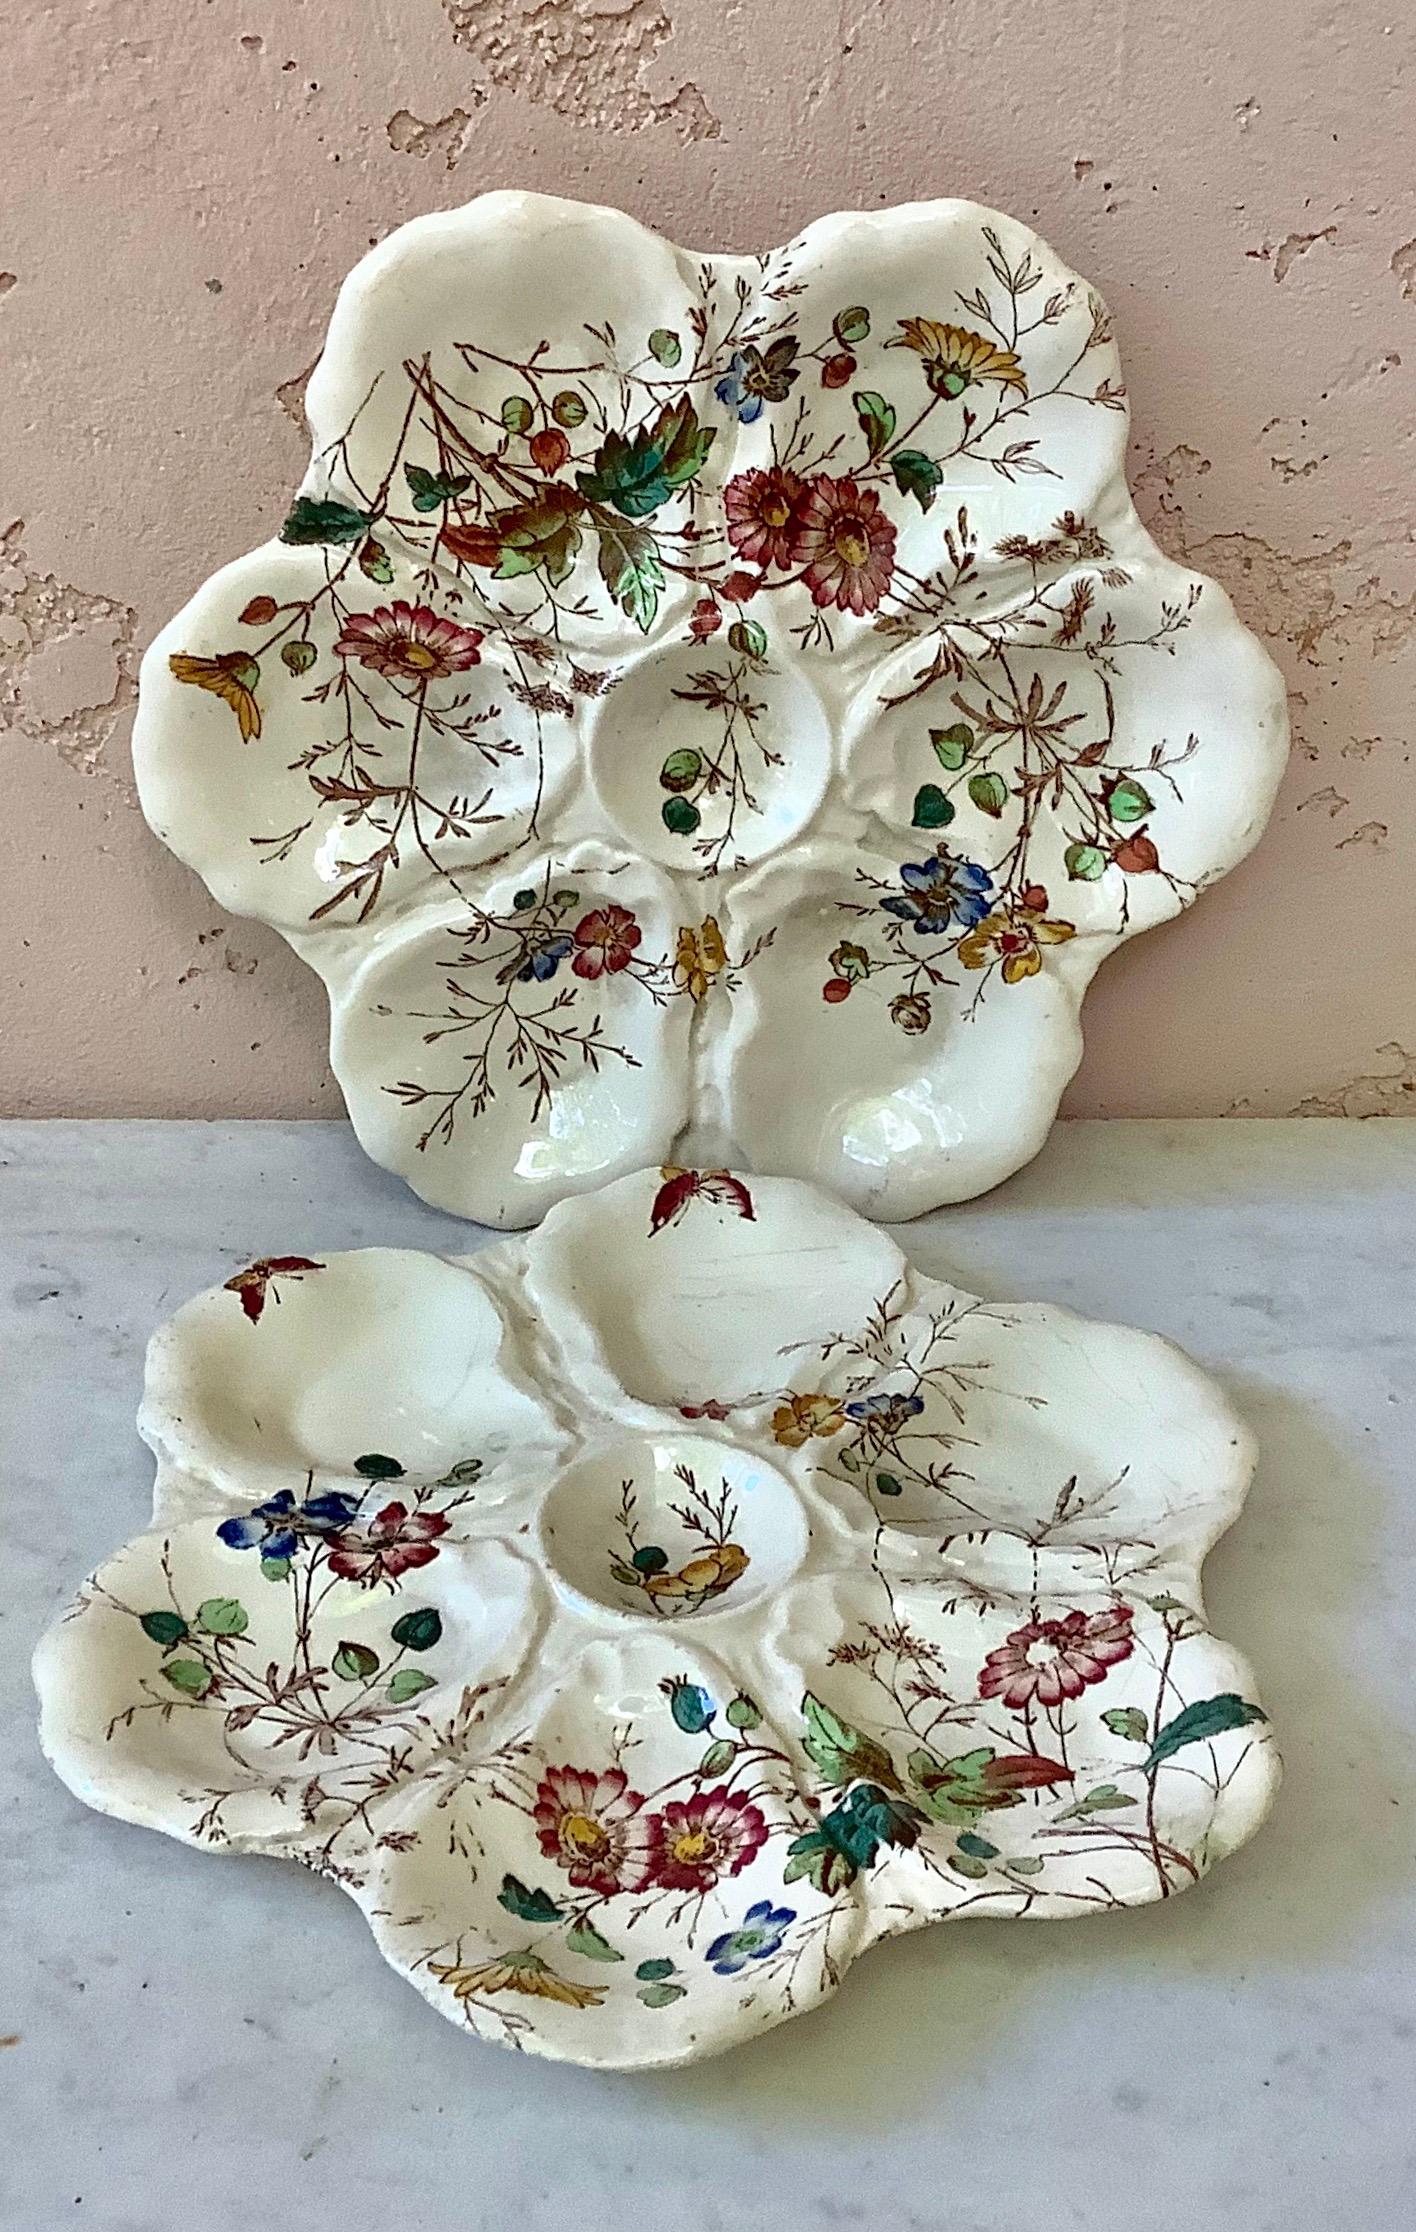 Ceramic 19th Century English Oyster Plate with Flowers and Butterfly